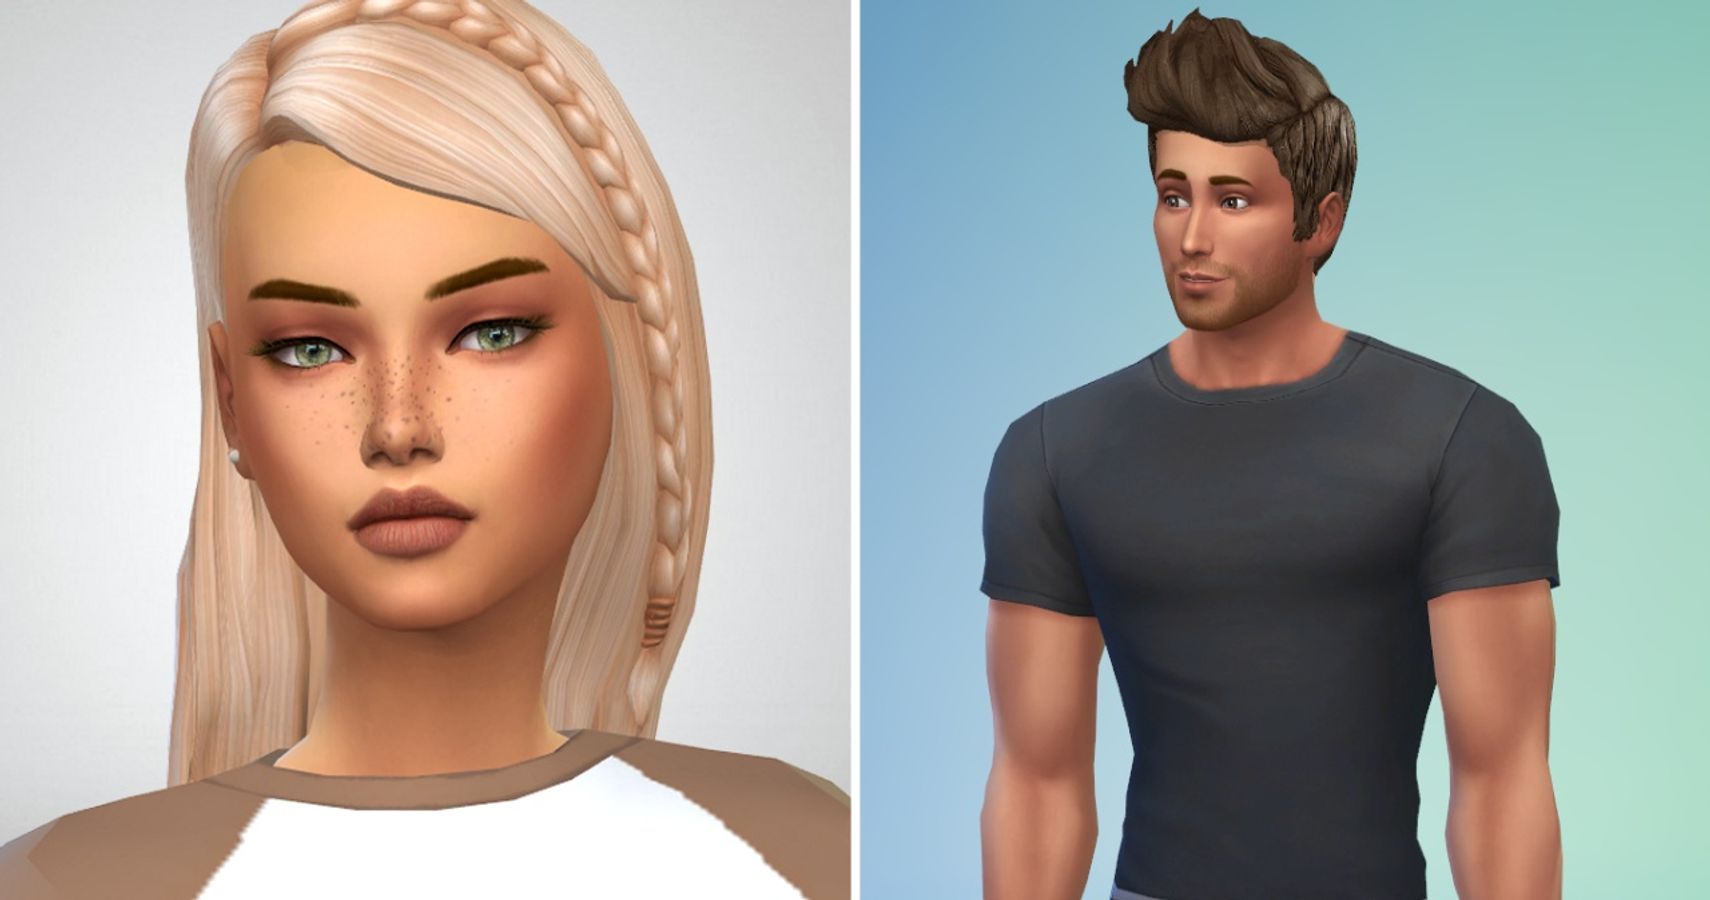 how to make sims 4 custom content